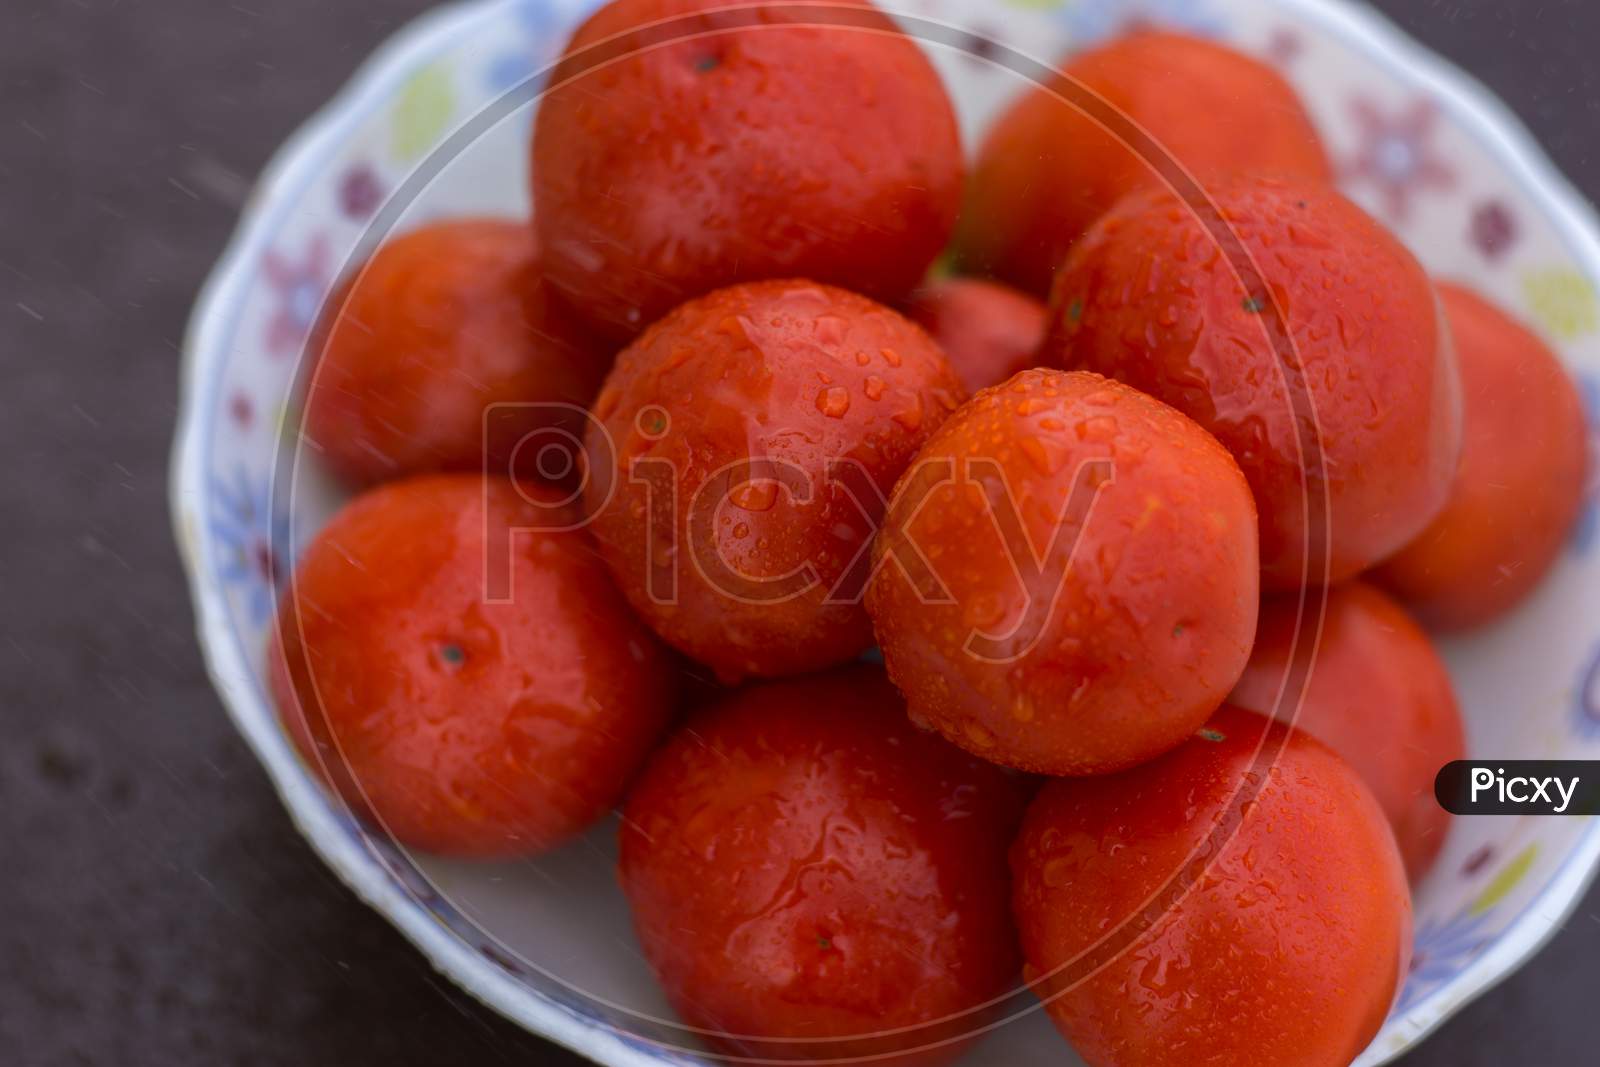 Red Organic Tomatoes In A Bowl